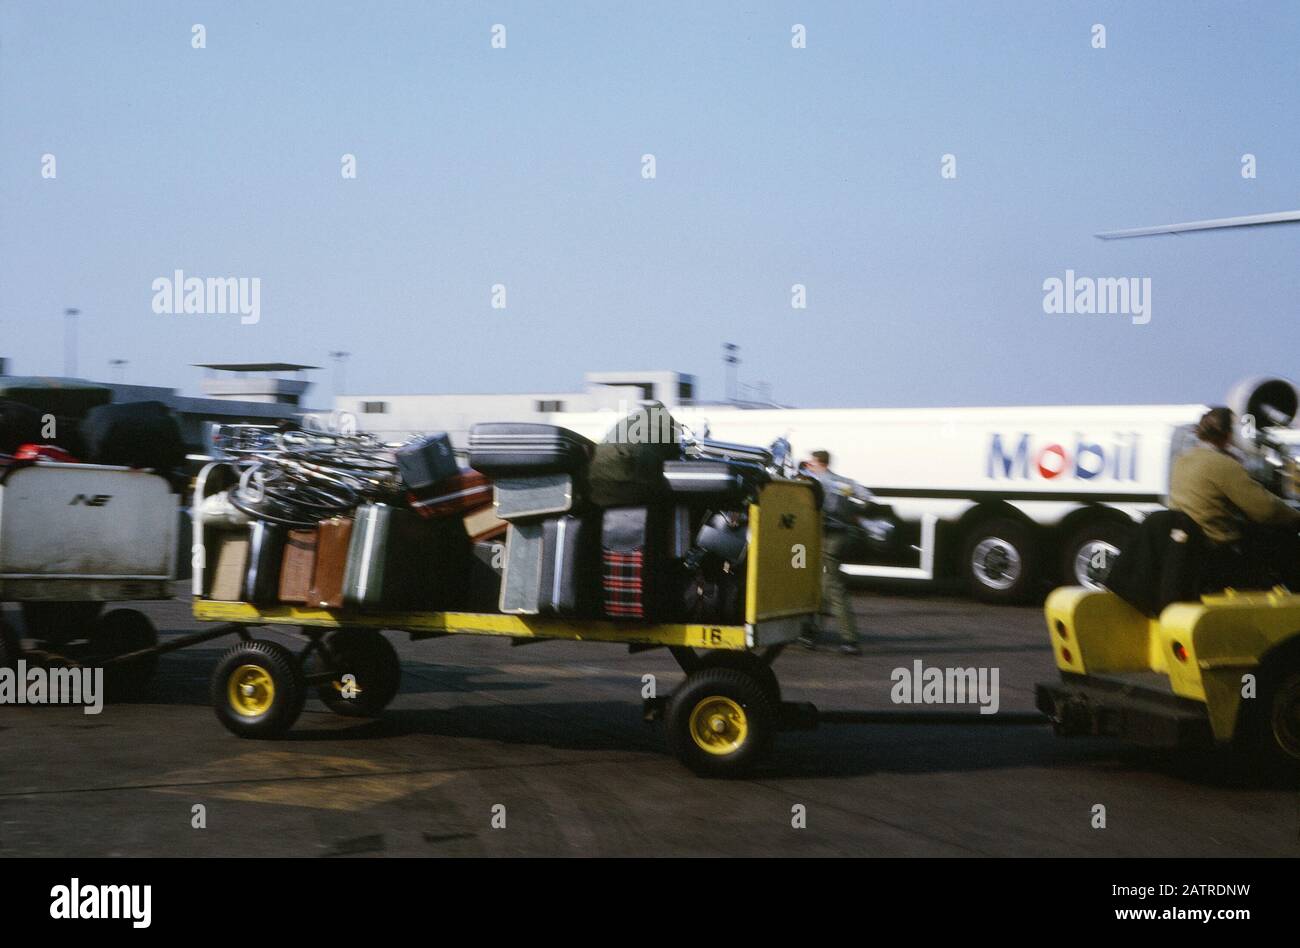 Vernacular photograph taken on a 35mm analog film transparency, believed to depict white and black utility truck from Mobil petroleum company on an airport tarmac, 1970. Major topics/objects detected include Vehicle, Aircraft, Air Force, Airplane and Truck. () Stock Photo